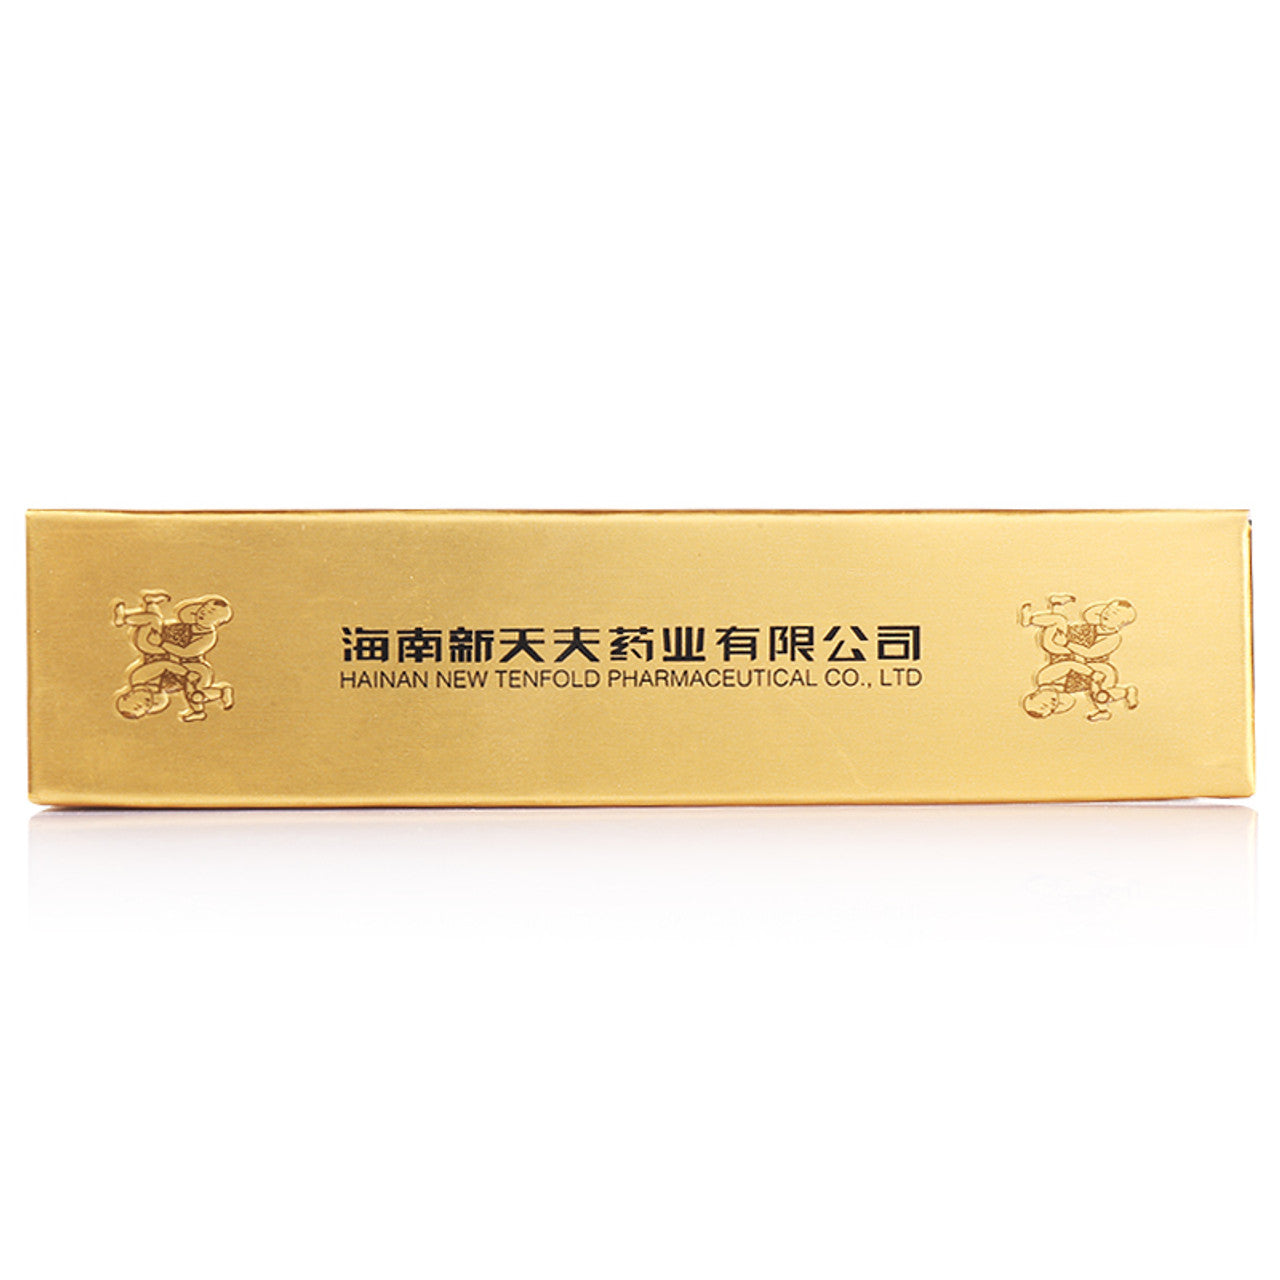 (6g *5 boxes/lot). Yi Shen Zhuang Yang Gao For Tonifying The Kidney & Yang, for erectile dysfunction of the penis. Yishen Zhuangyang Gao or Yishen Zhuangyang Ointment